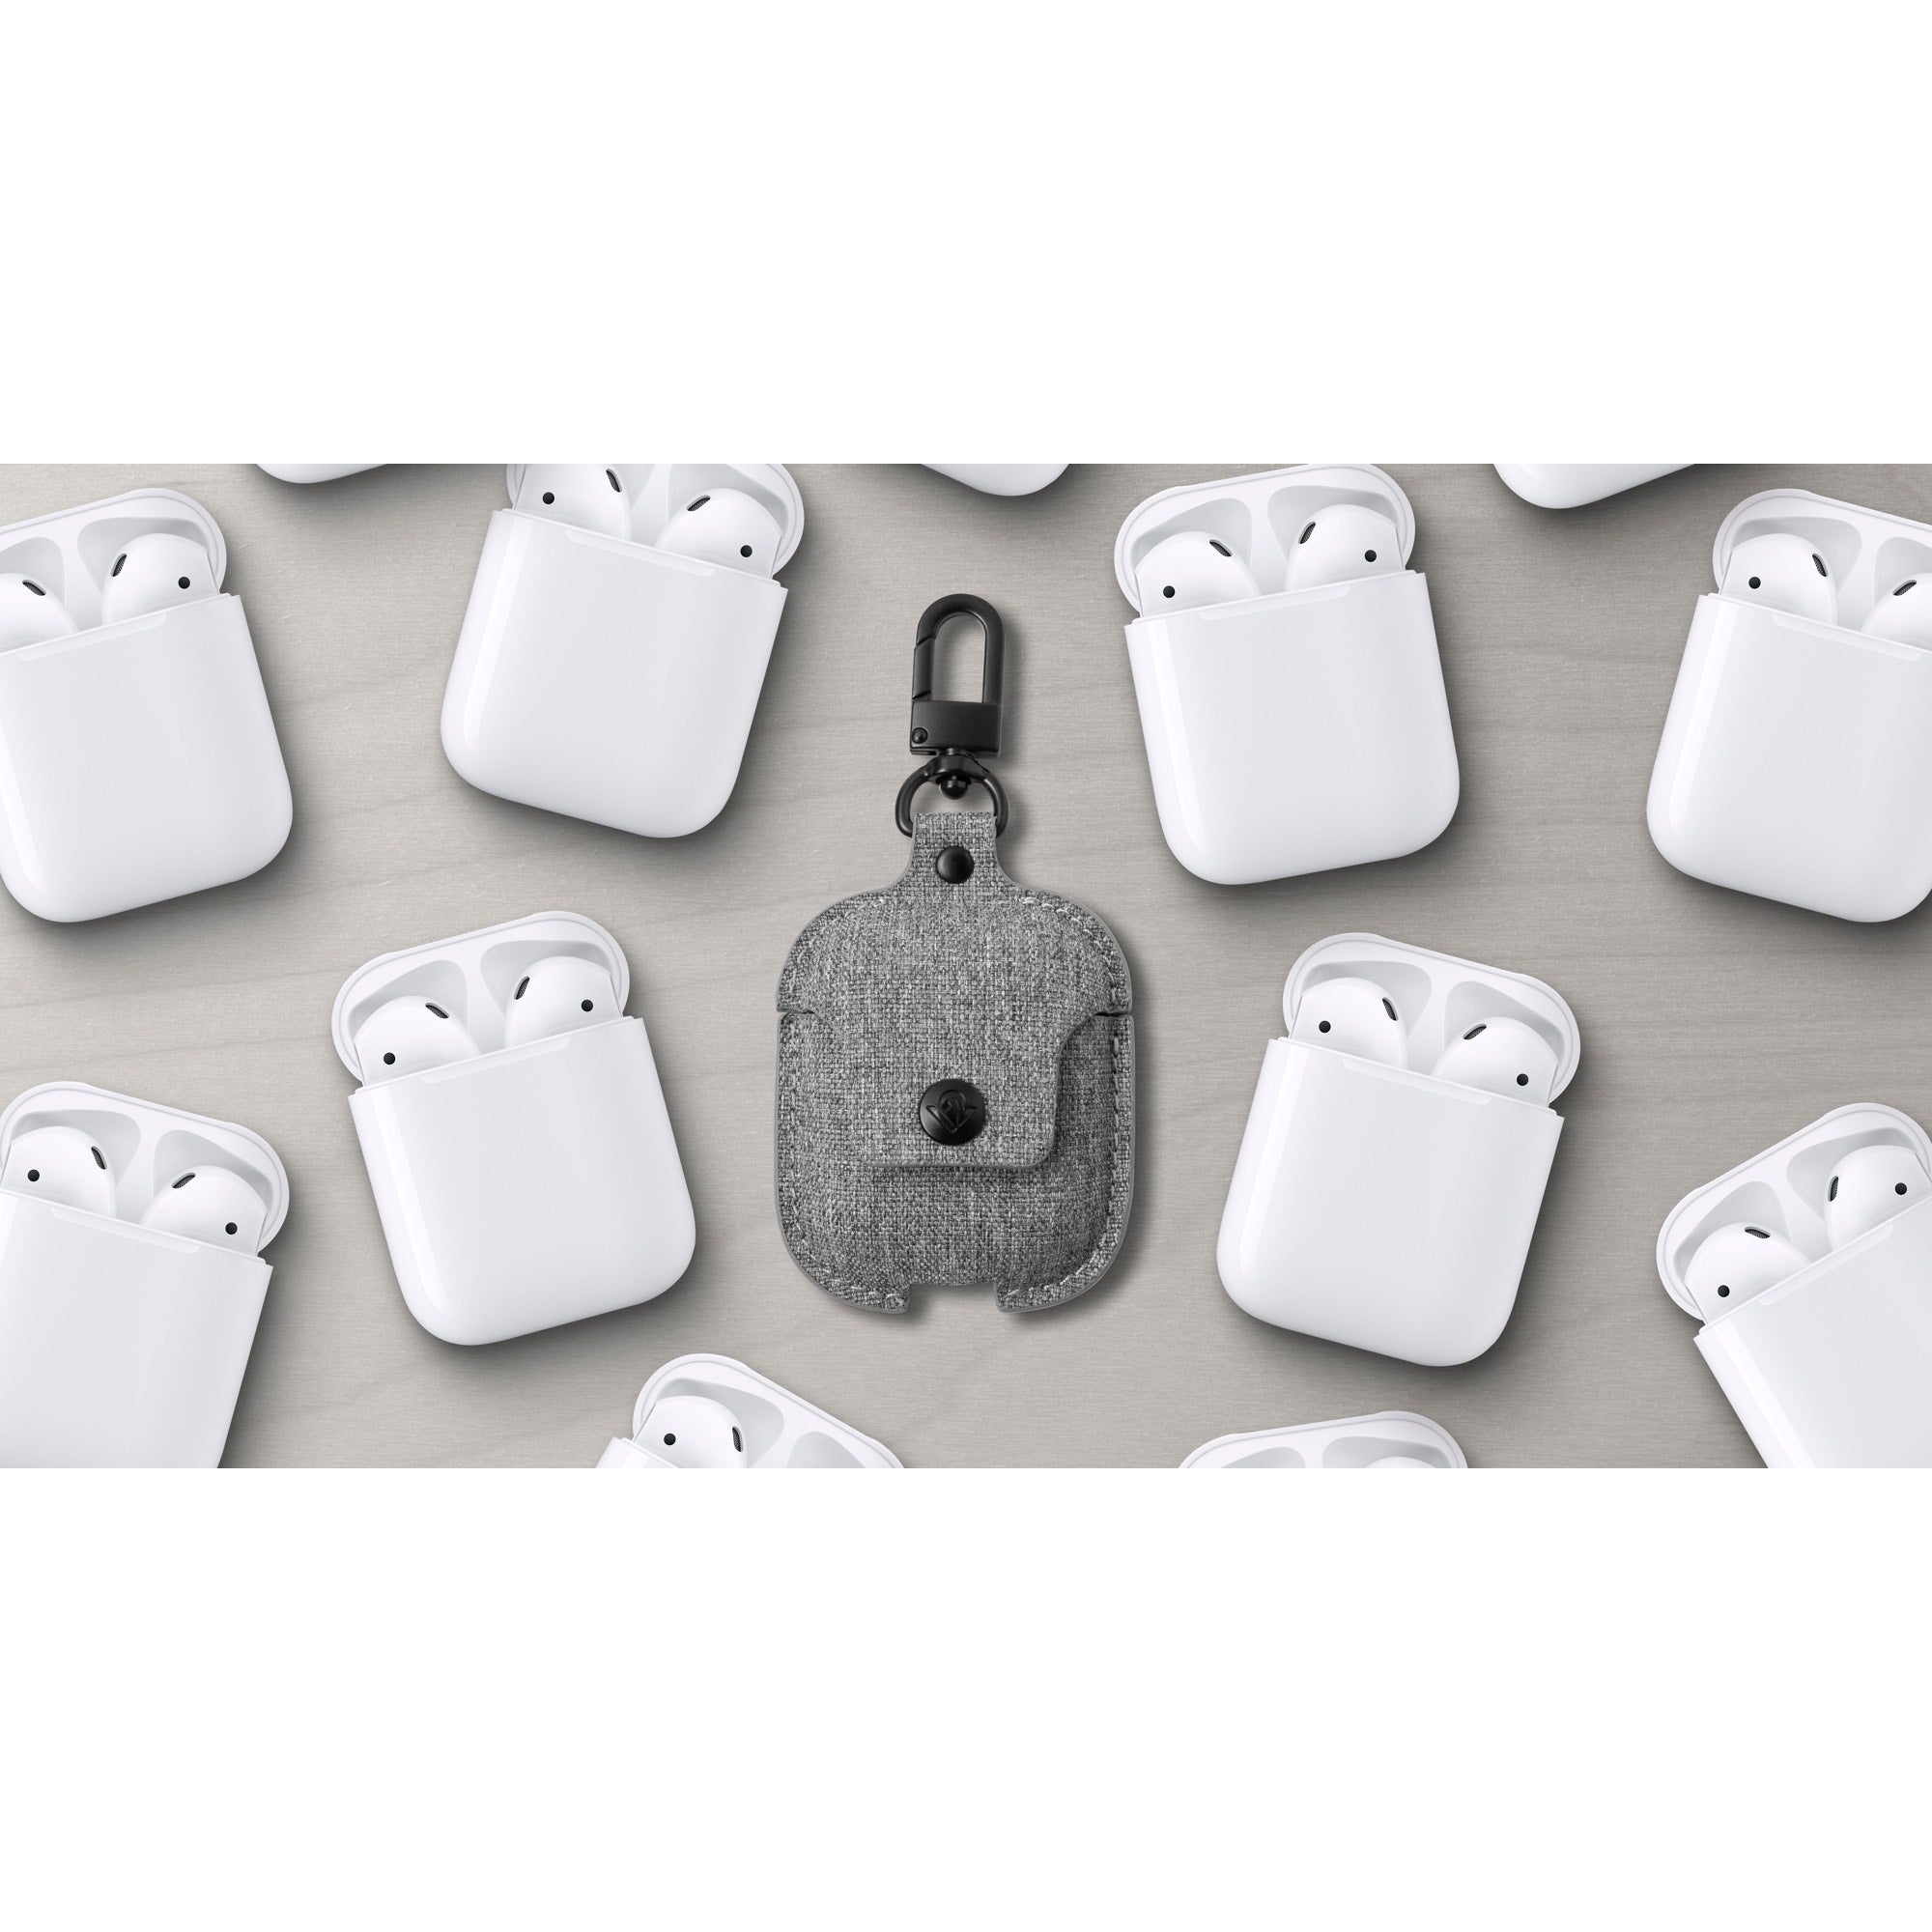 AirSnap Twill for AirPods - Fog